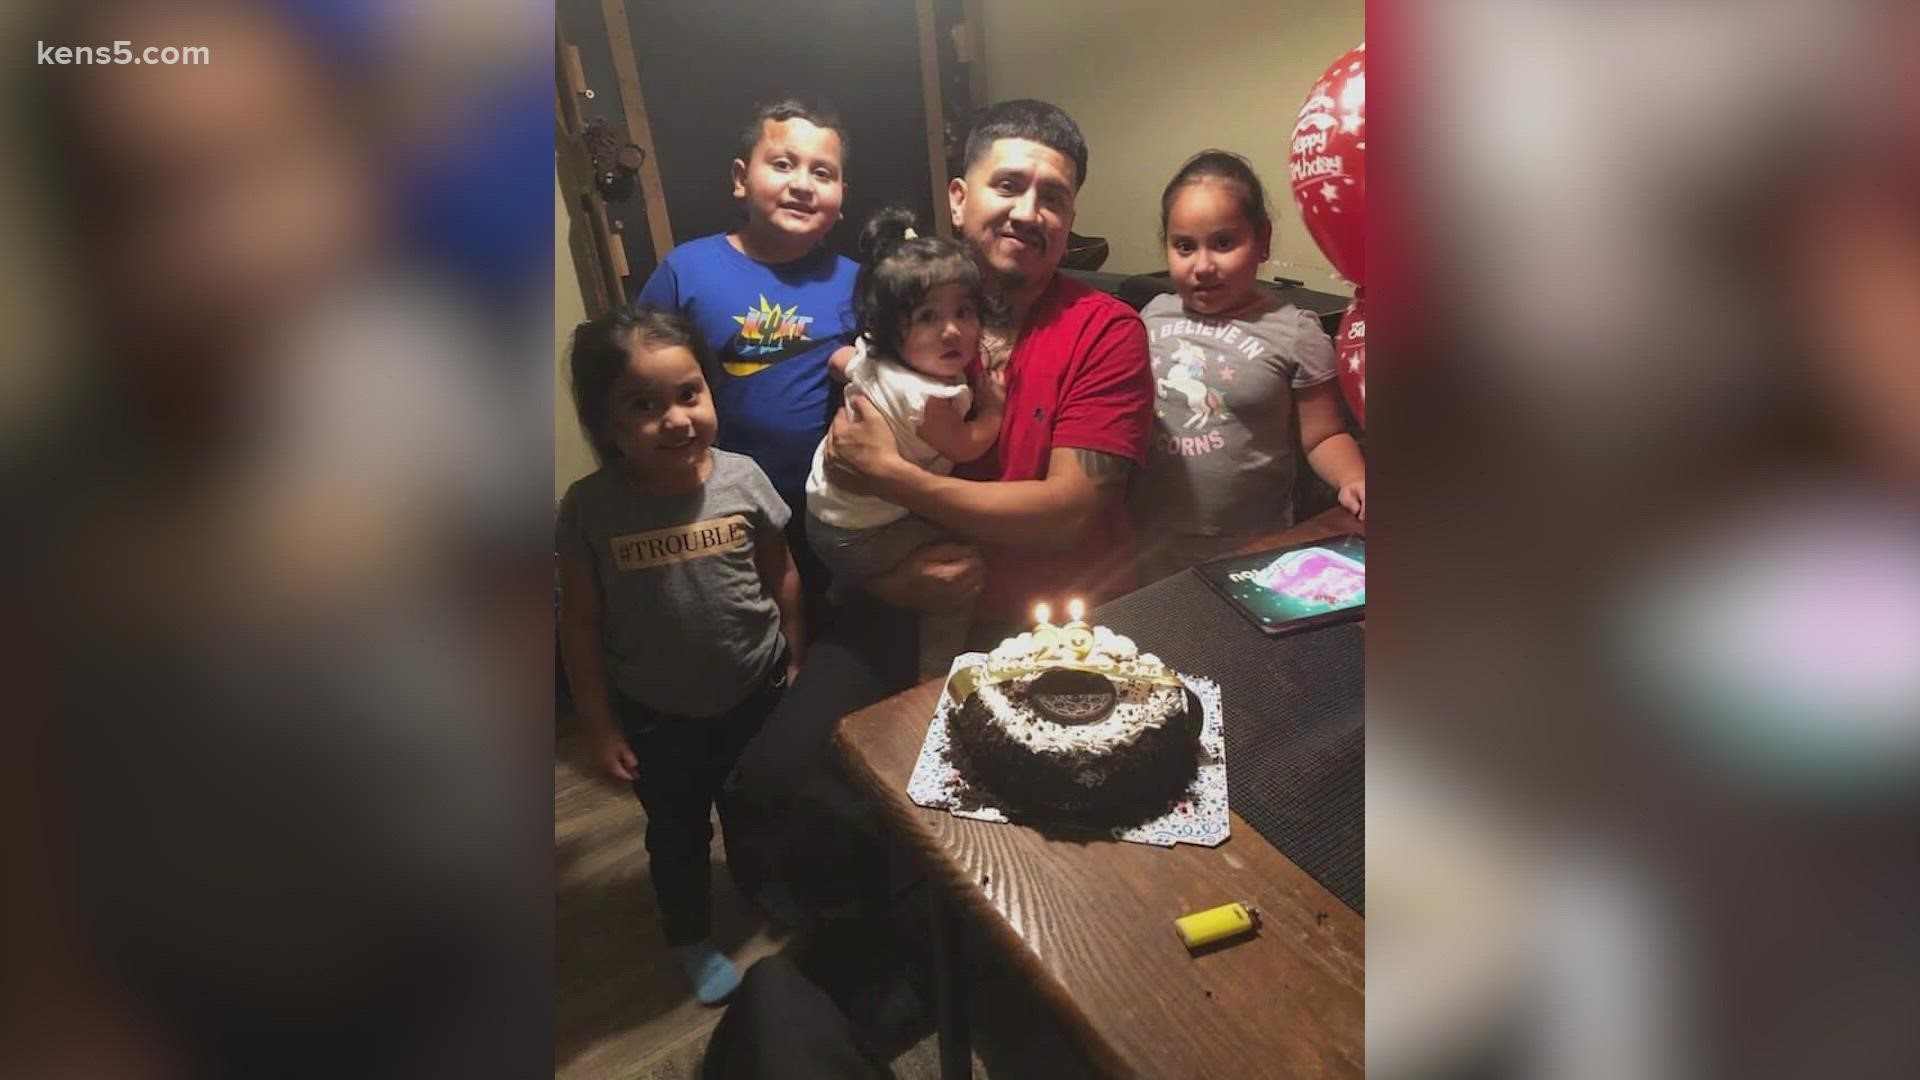 Mariano Lugo was killed when he was hit by a driver on the south side.